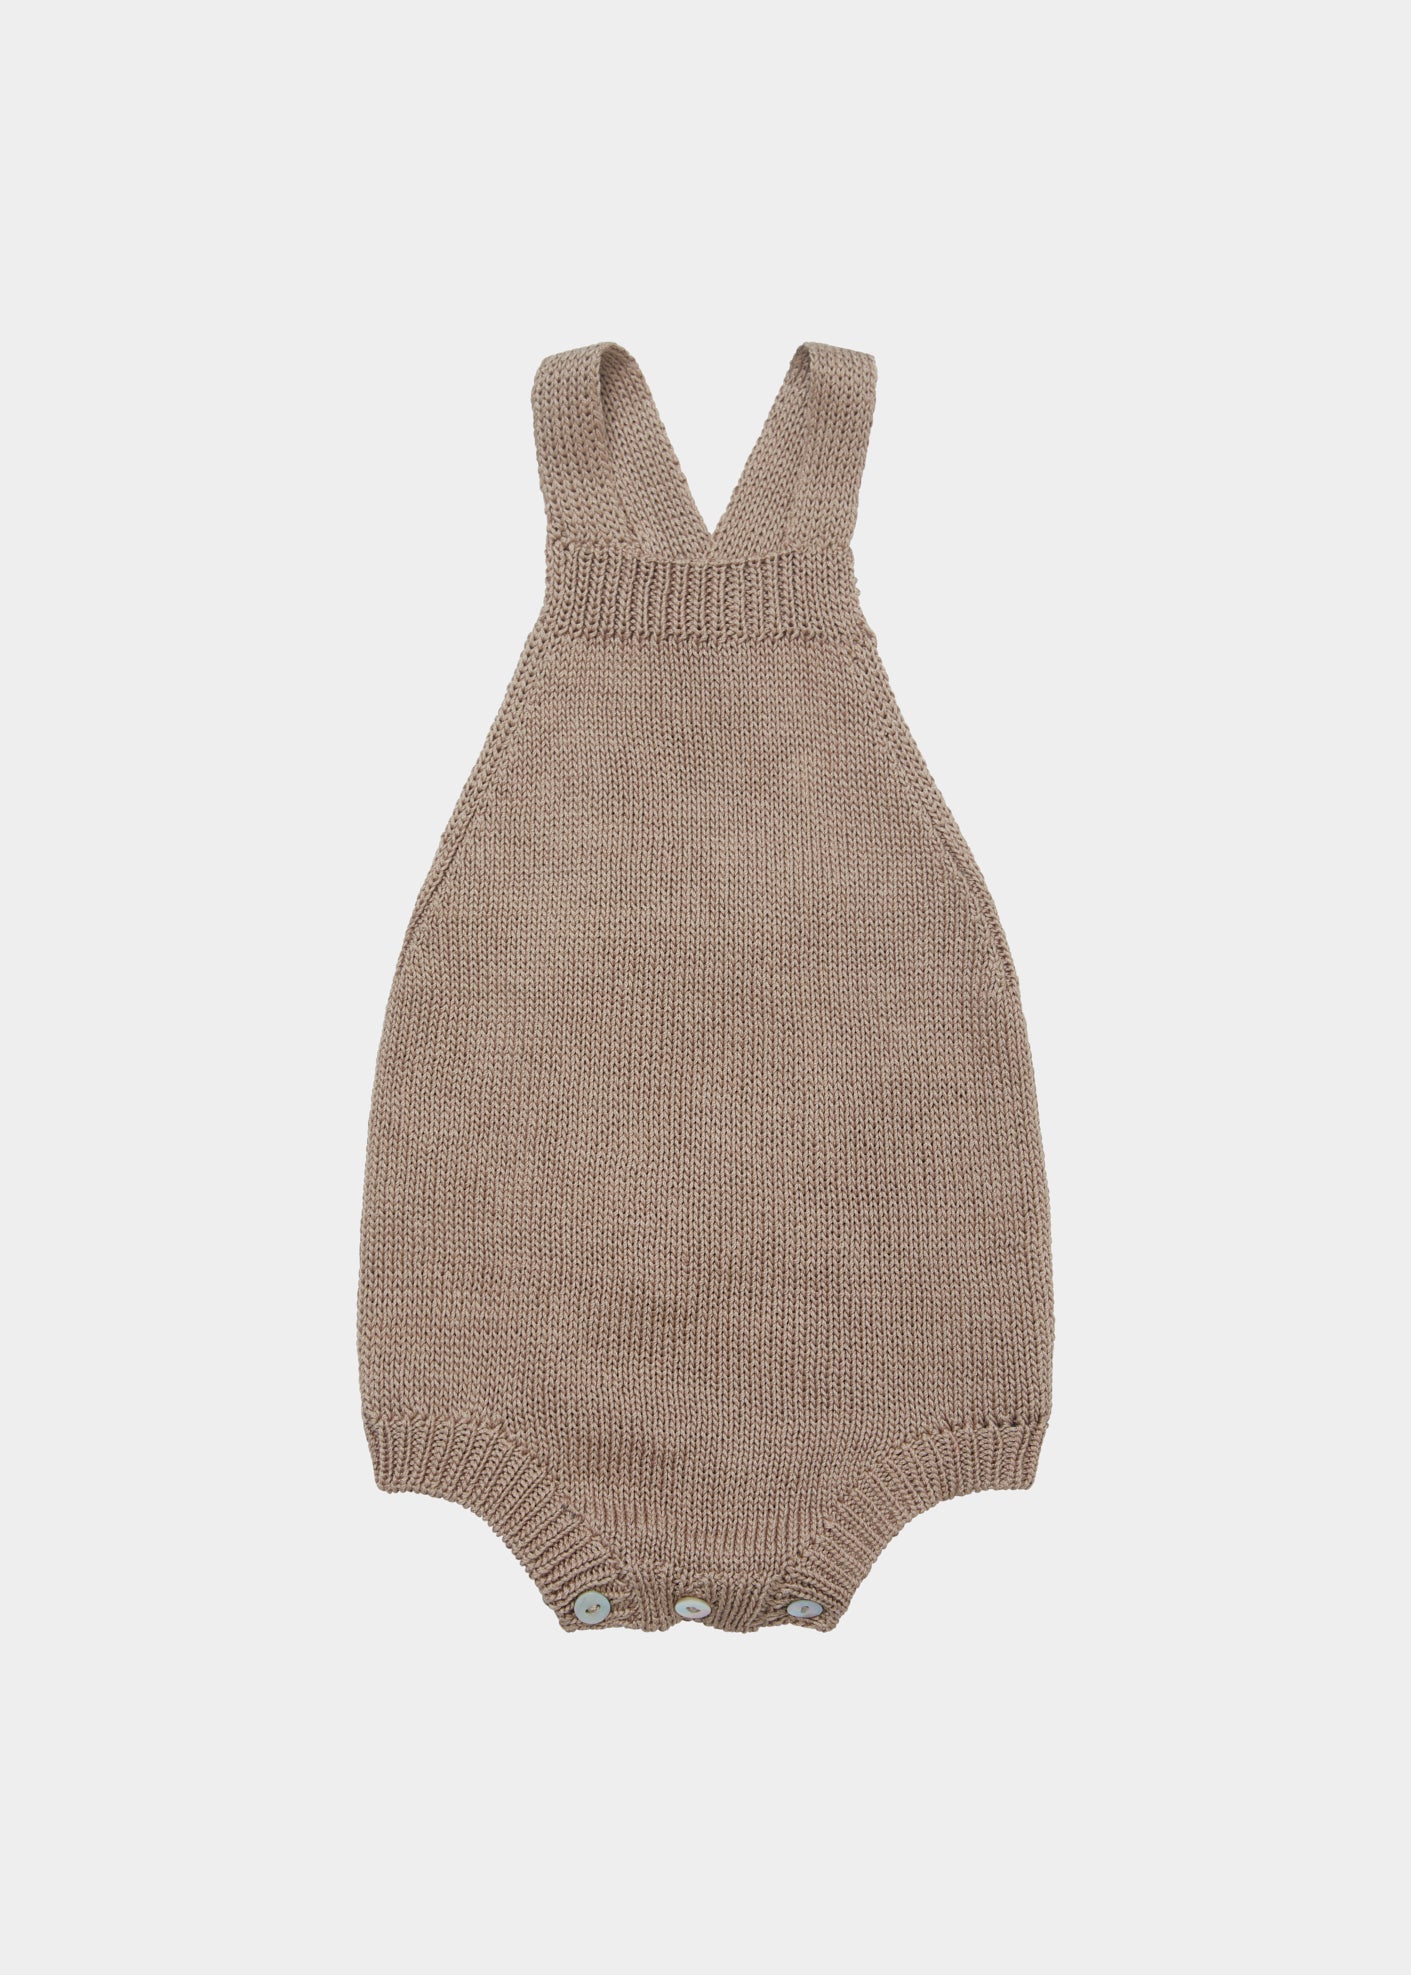 PHLOX BABY ROMPER - TAUPE